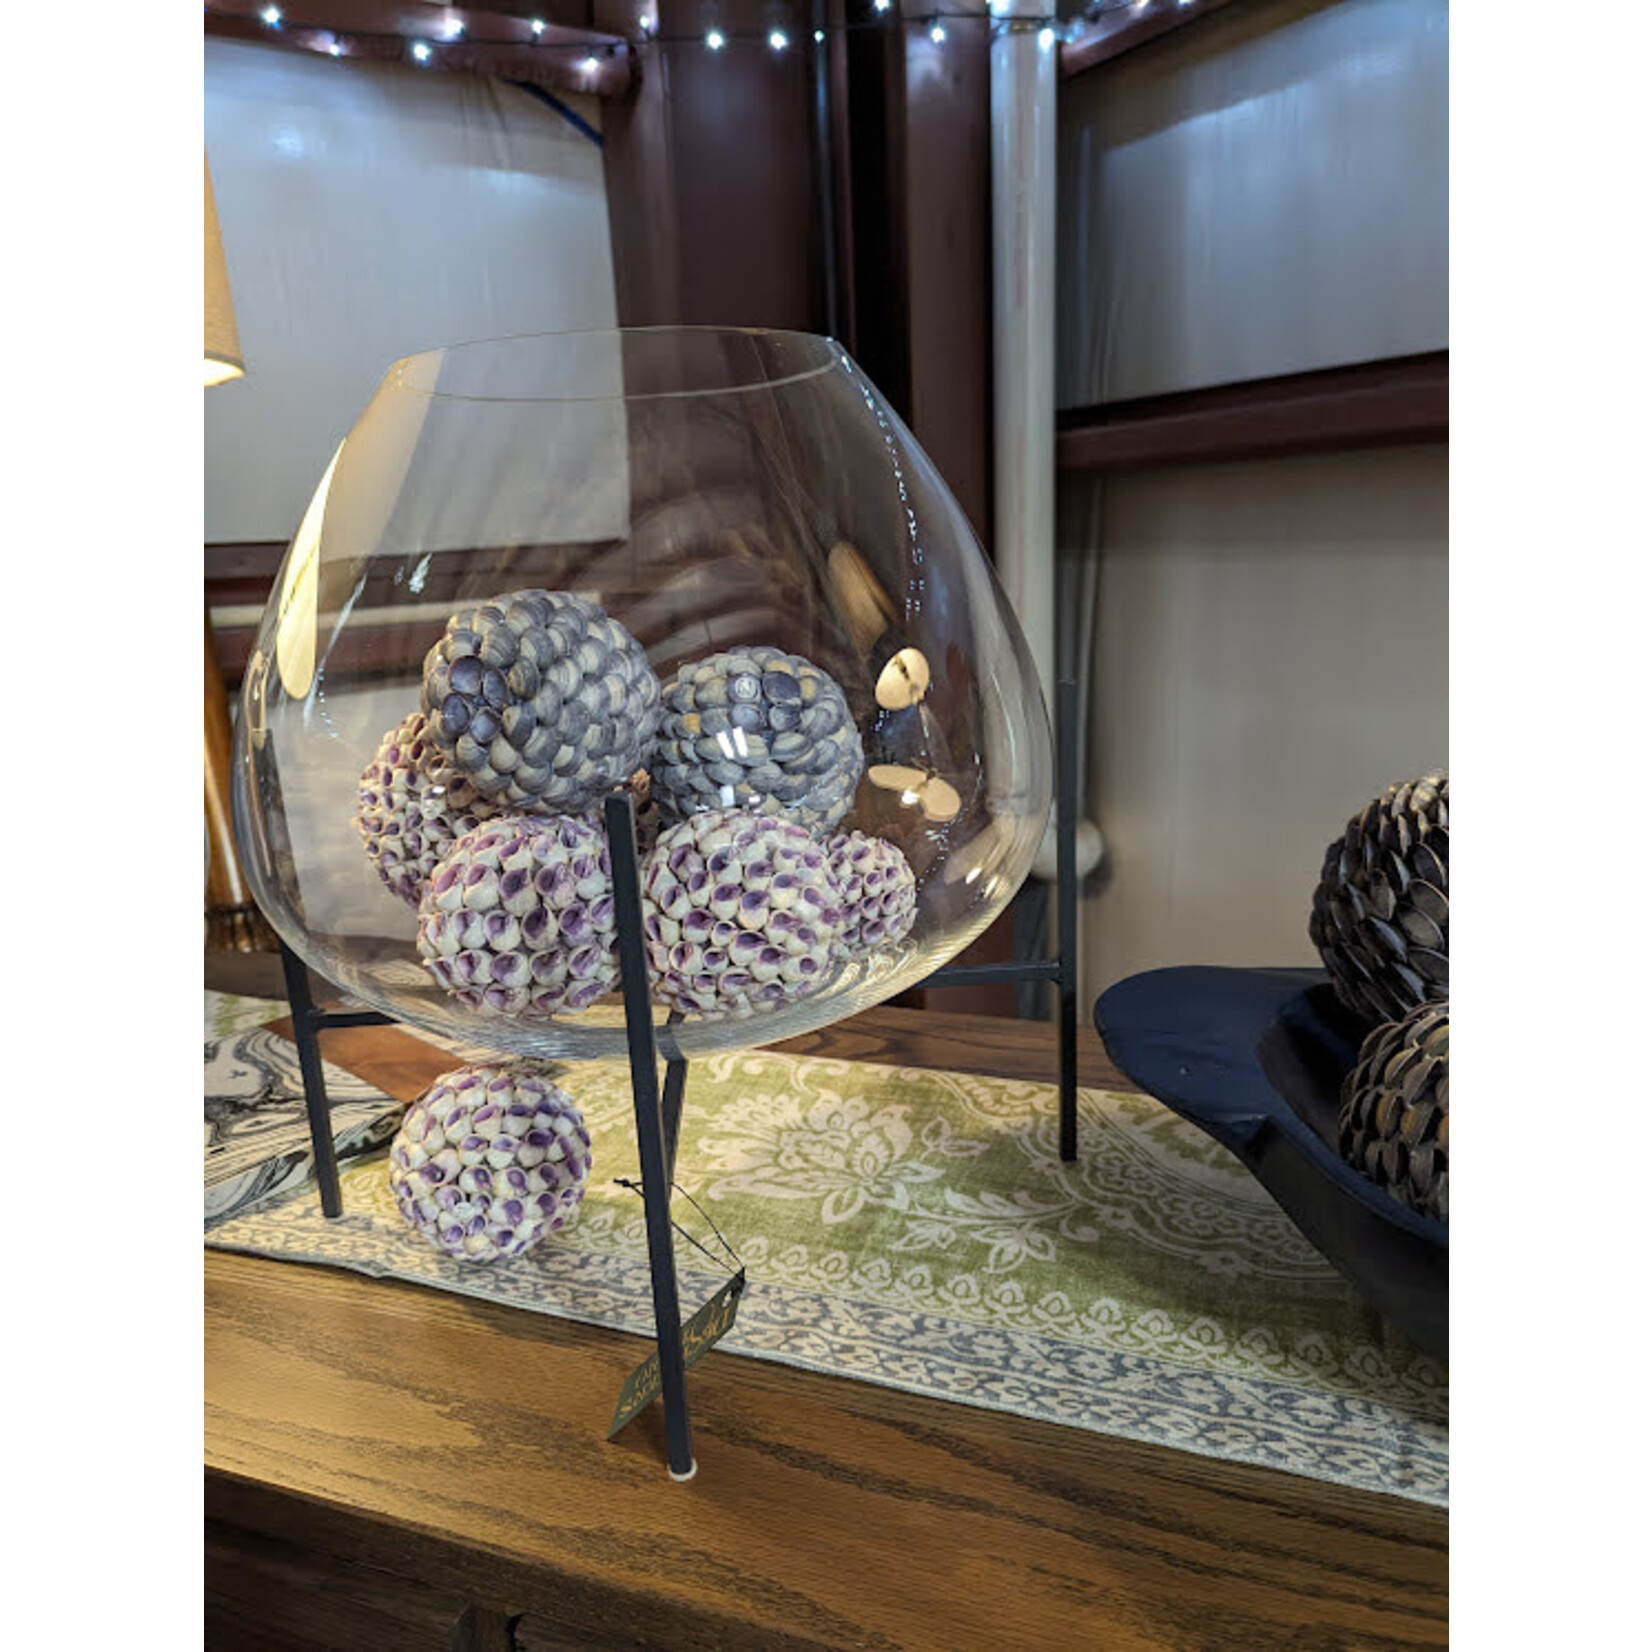 Roost Lavender Shell Sphere 4.5"